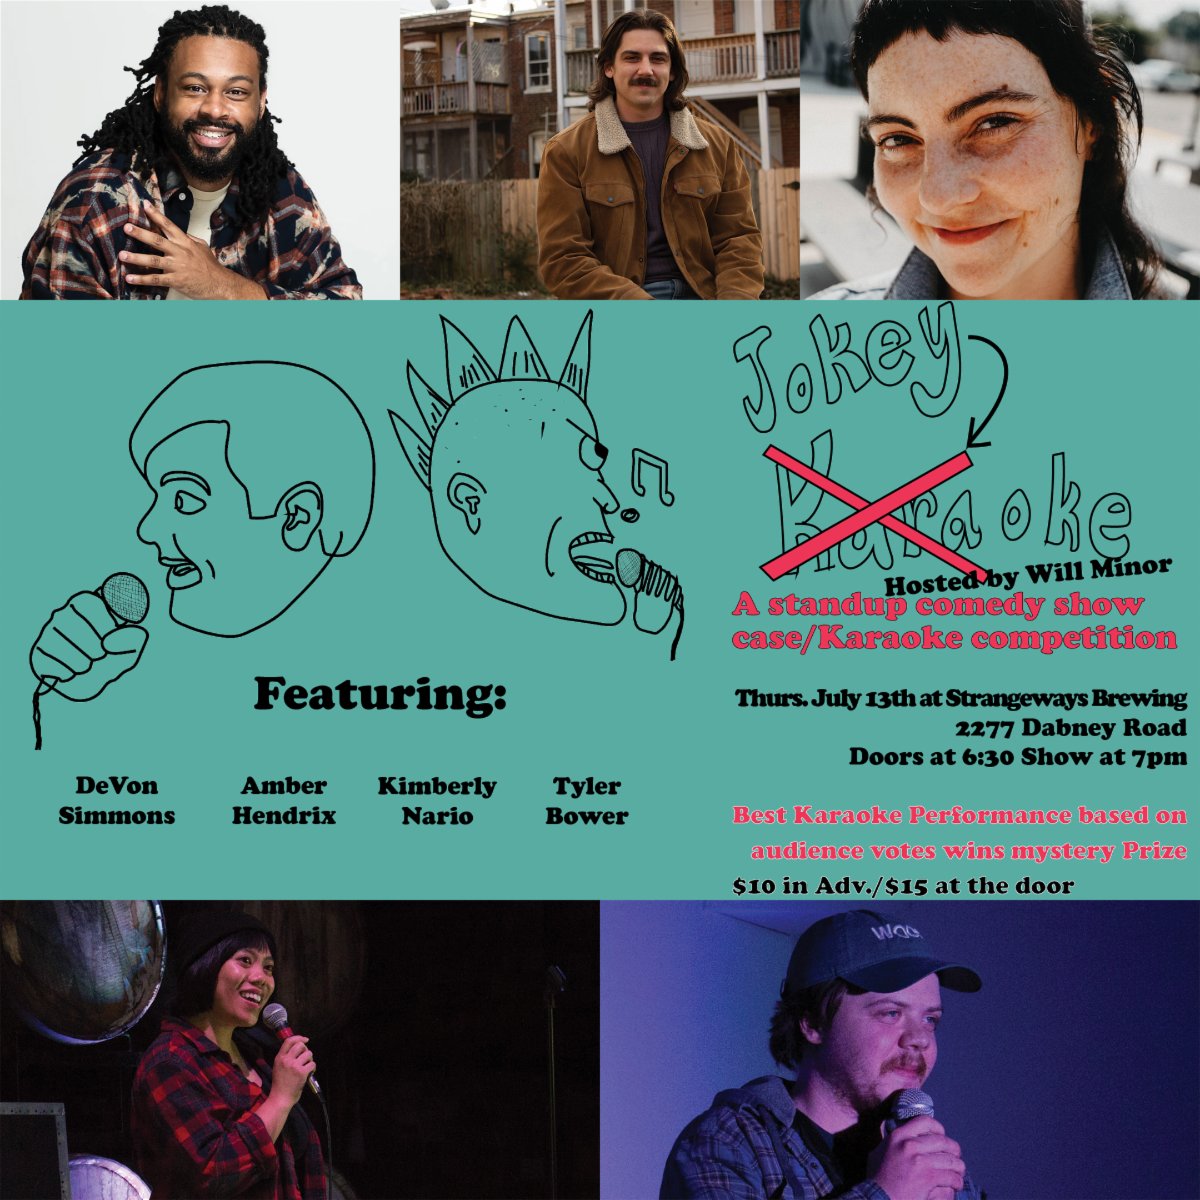 We've got a great show coming up this thursday! just look at the lineup! and not only are you gonna hear them tell jokes, you're gonna hear their angelic singing voices! Be sure to grab tickets now to save on admission! linktr.ee/traversecomedy #RVA #ThingsToDoInRVA